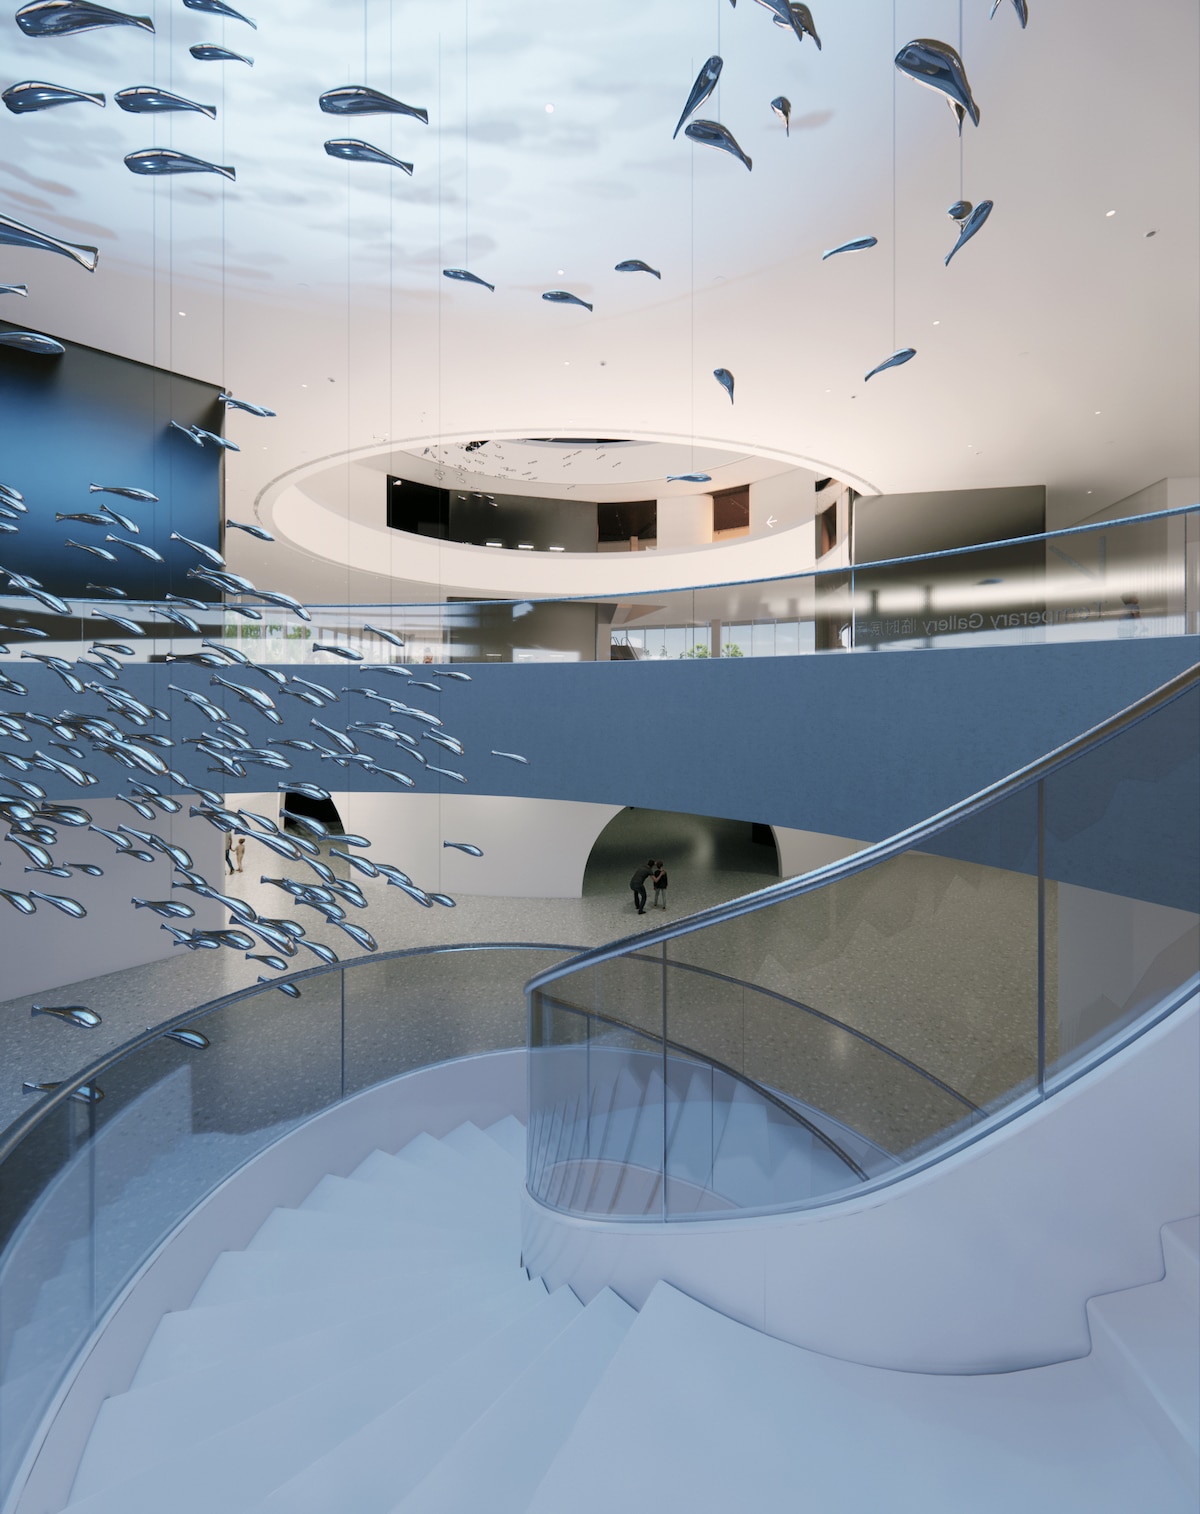 Interior view of the atrium of the Hainan Science and Technology Museum by MAD Architects